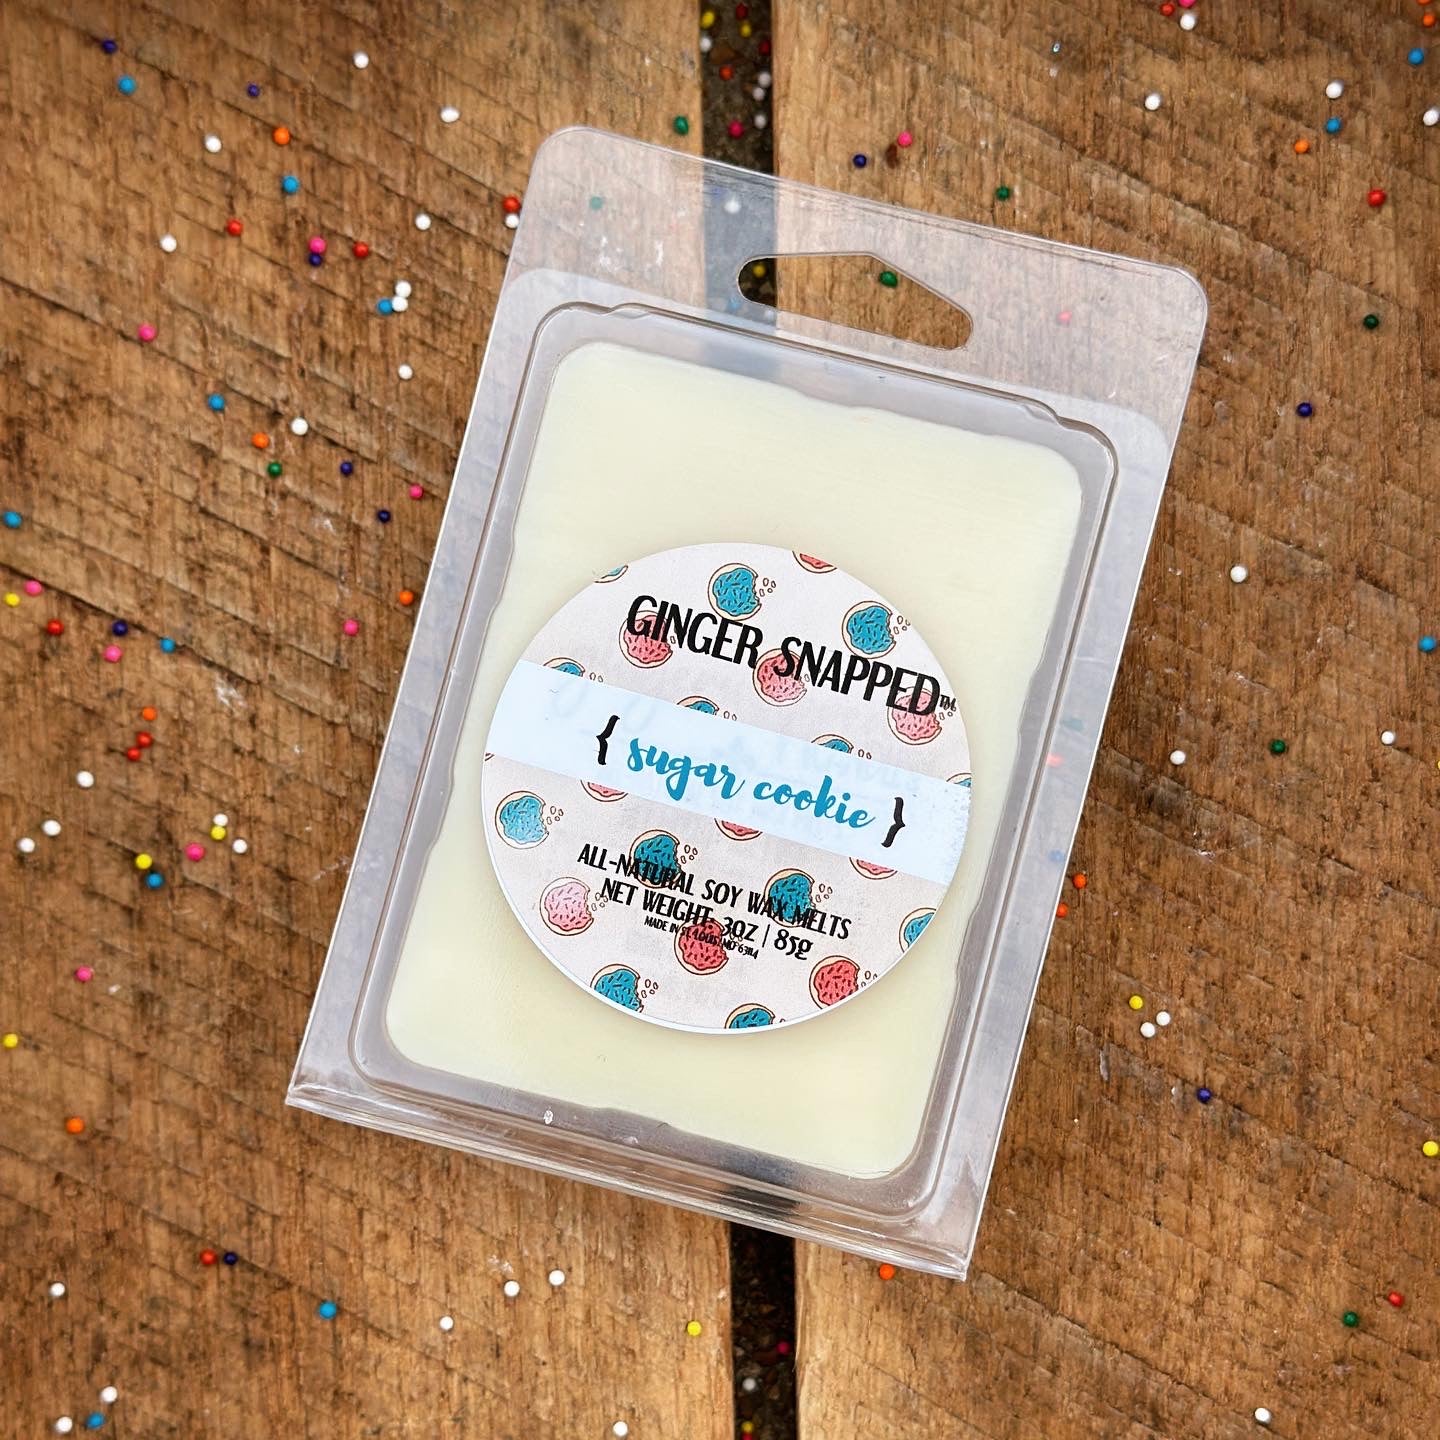 DELICIOUS DESSERTS | Dessert-Inspired Soy Wax Melts